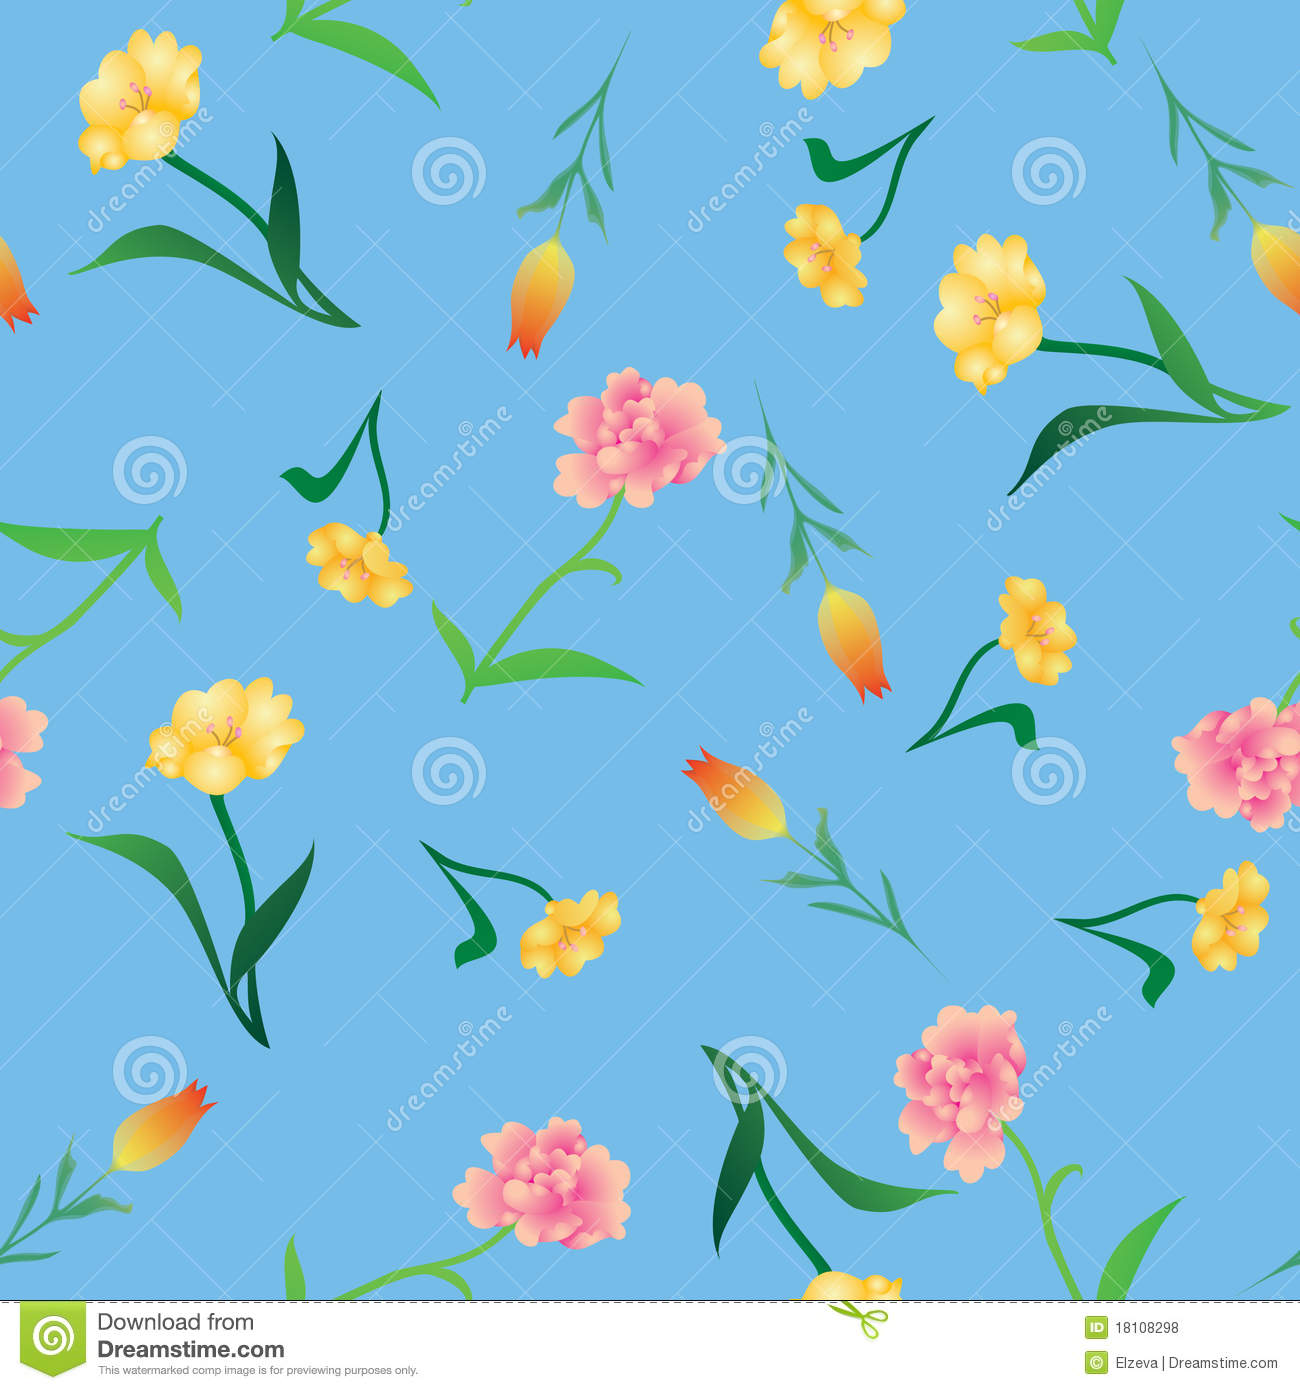 Various Flowers Background Royalty Free Stock Photos   Image  18108298